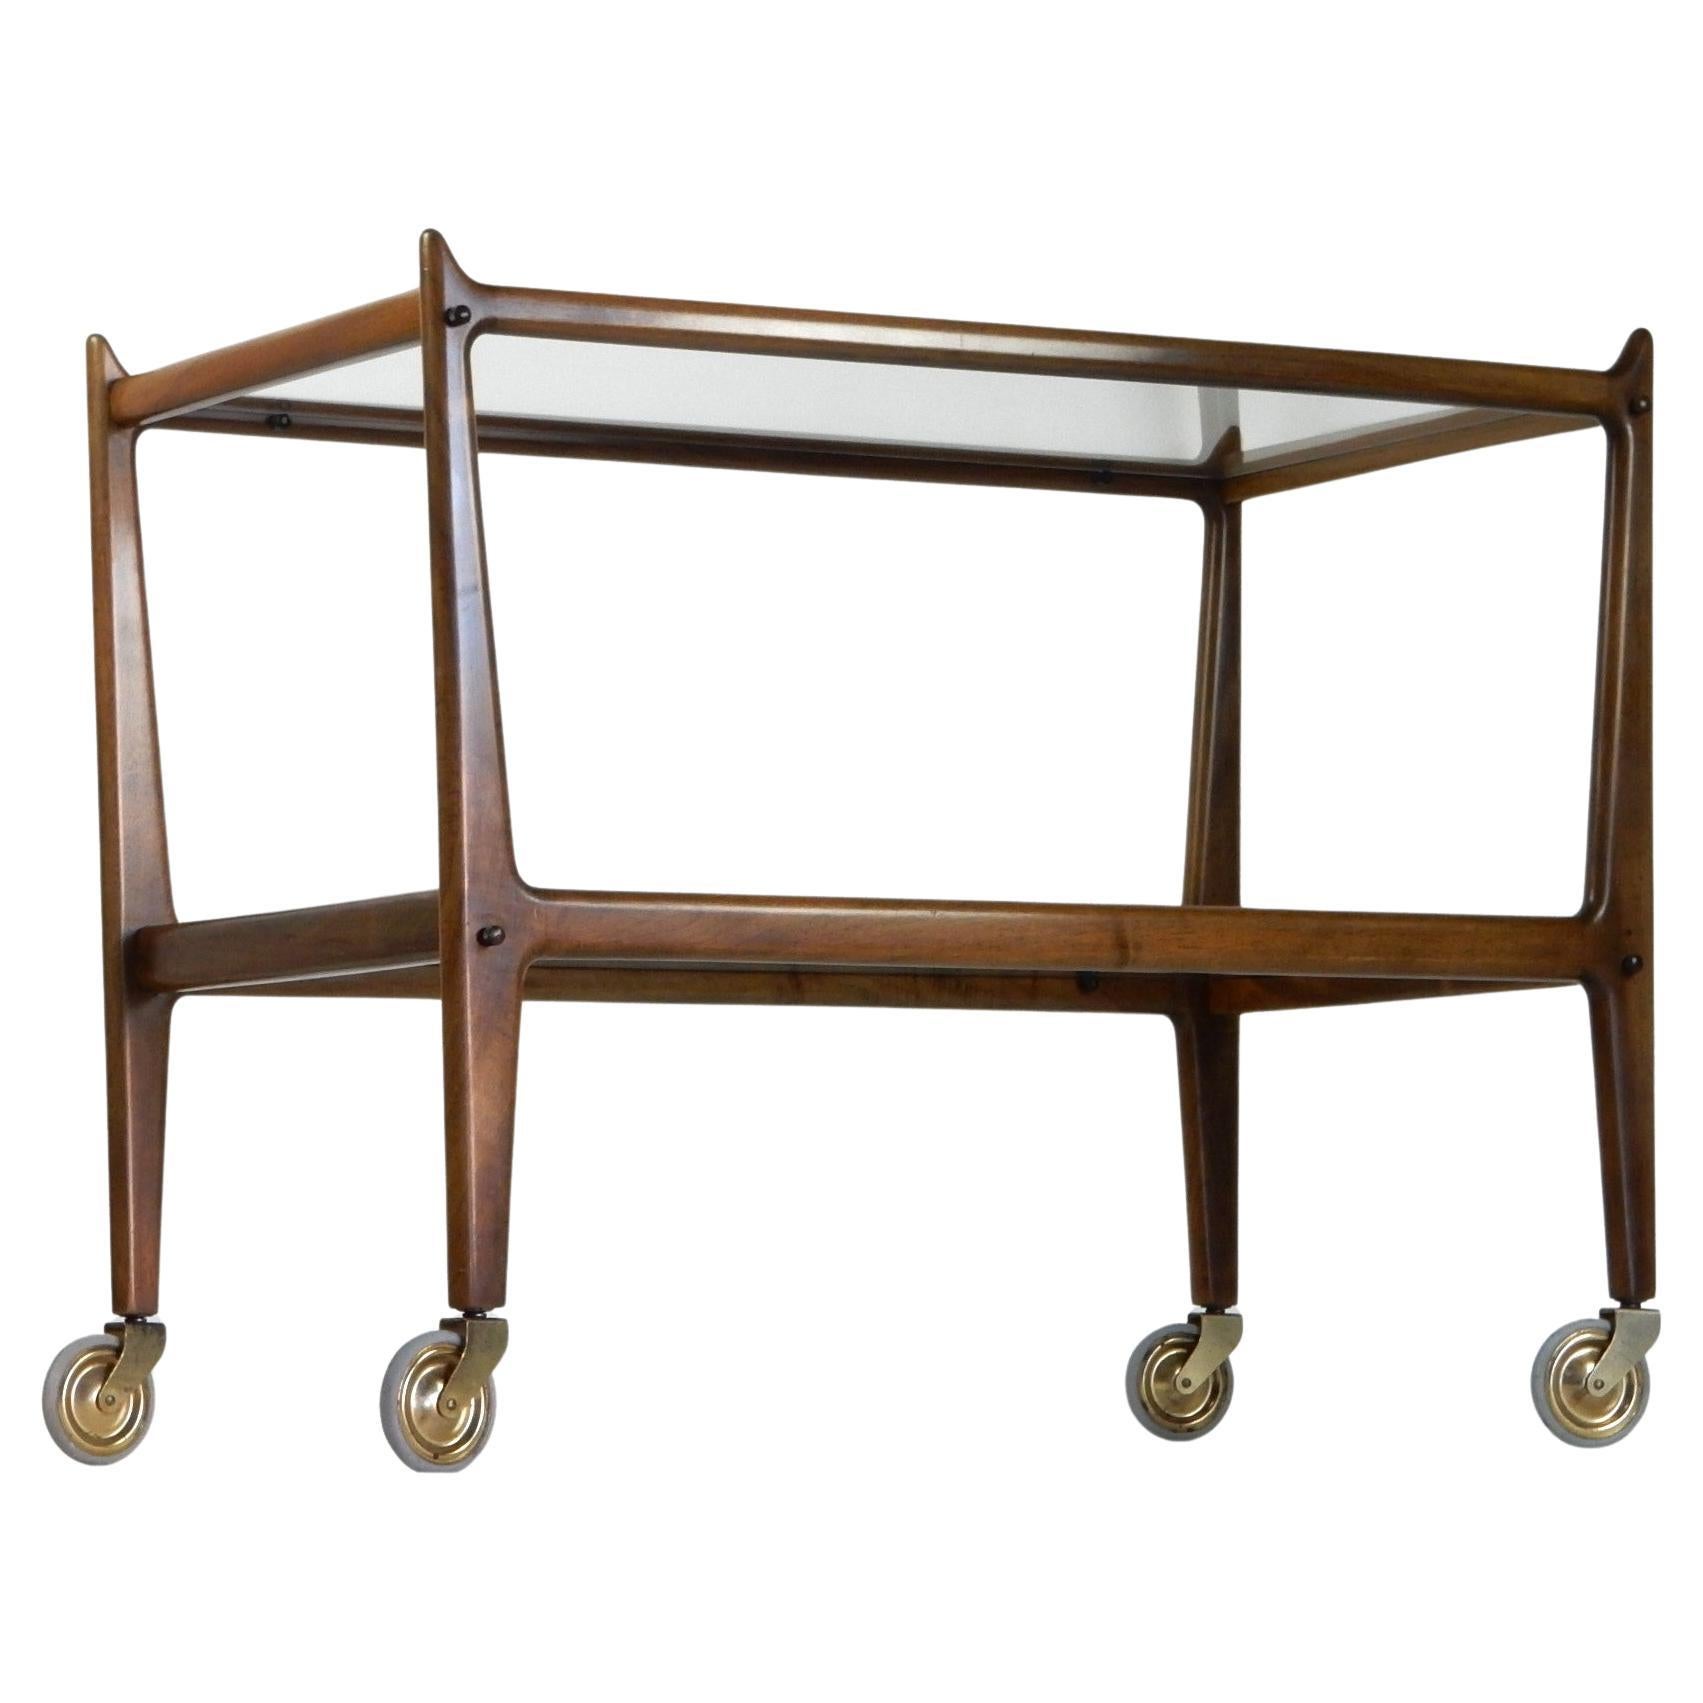 Stunning 1950's serving cart attributed to Cesare Lacca of Italy.
Sleek sculptural design in Walnut with brass accents.
Exceptional, all original condition. 
This will be disassembled and carefully packed for shipping.